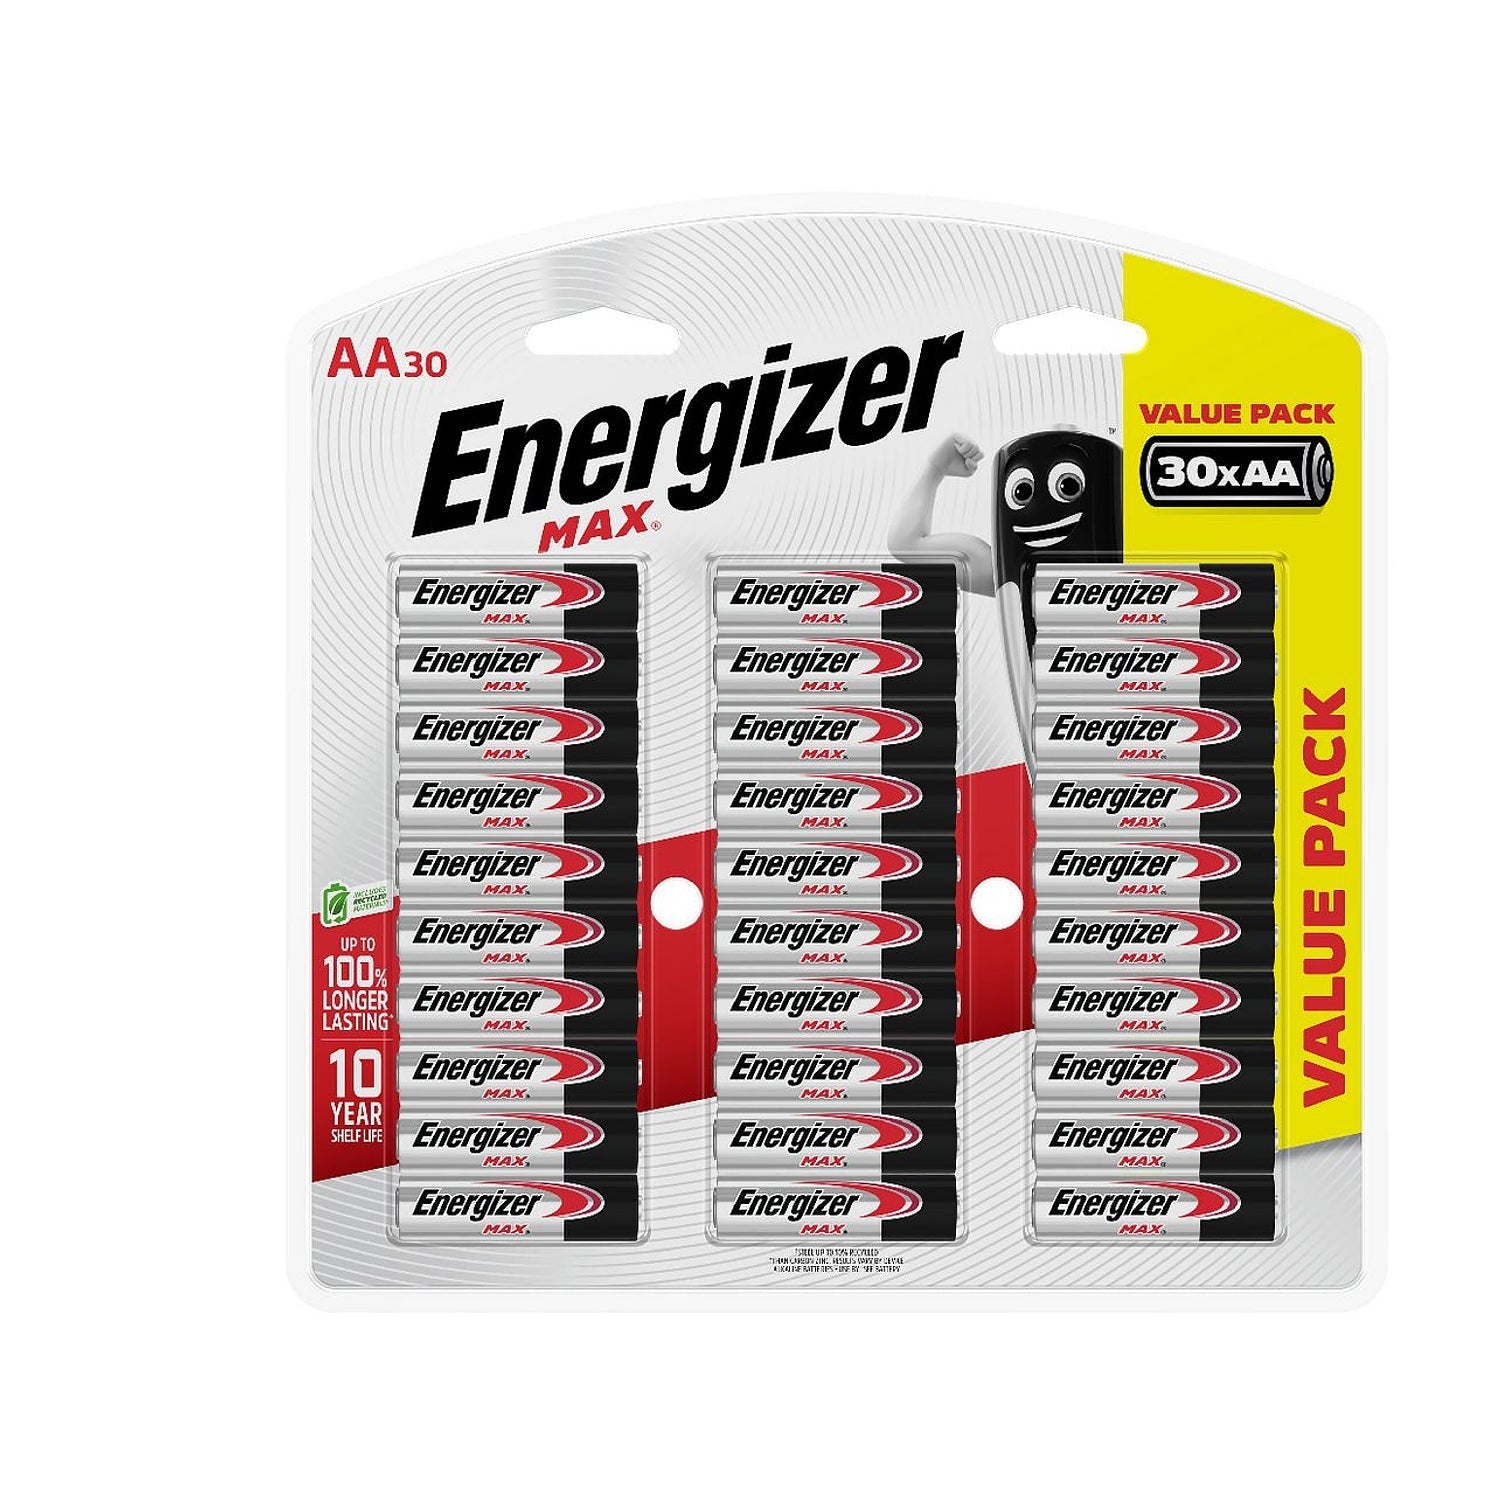 Energizer Max Aa - 30 Pack E301610904 Power Tool Services